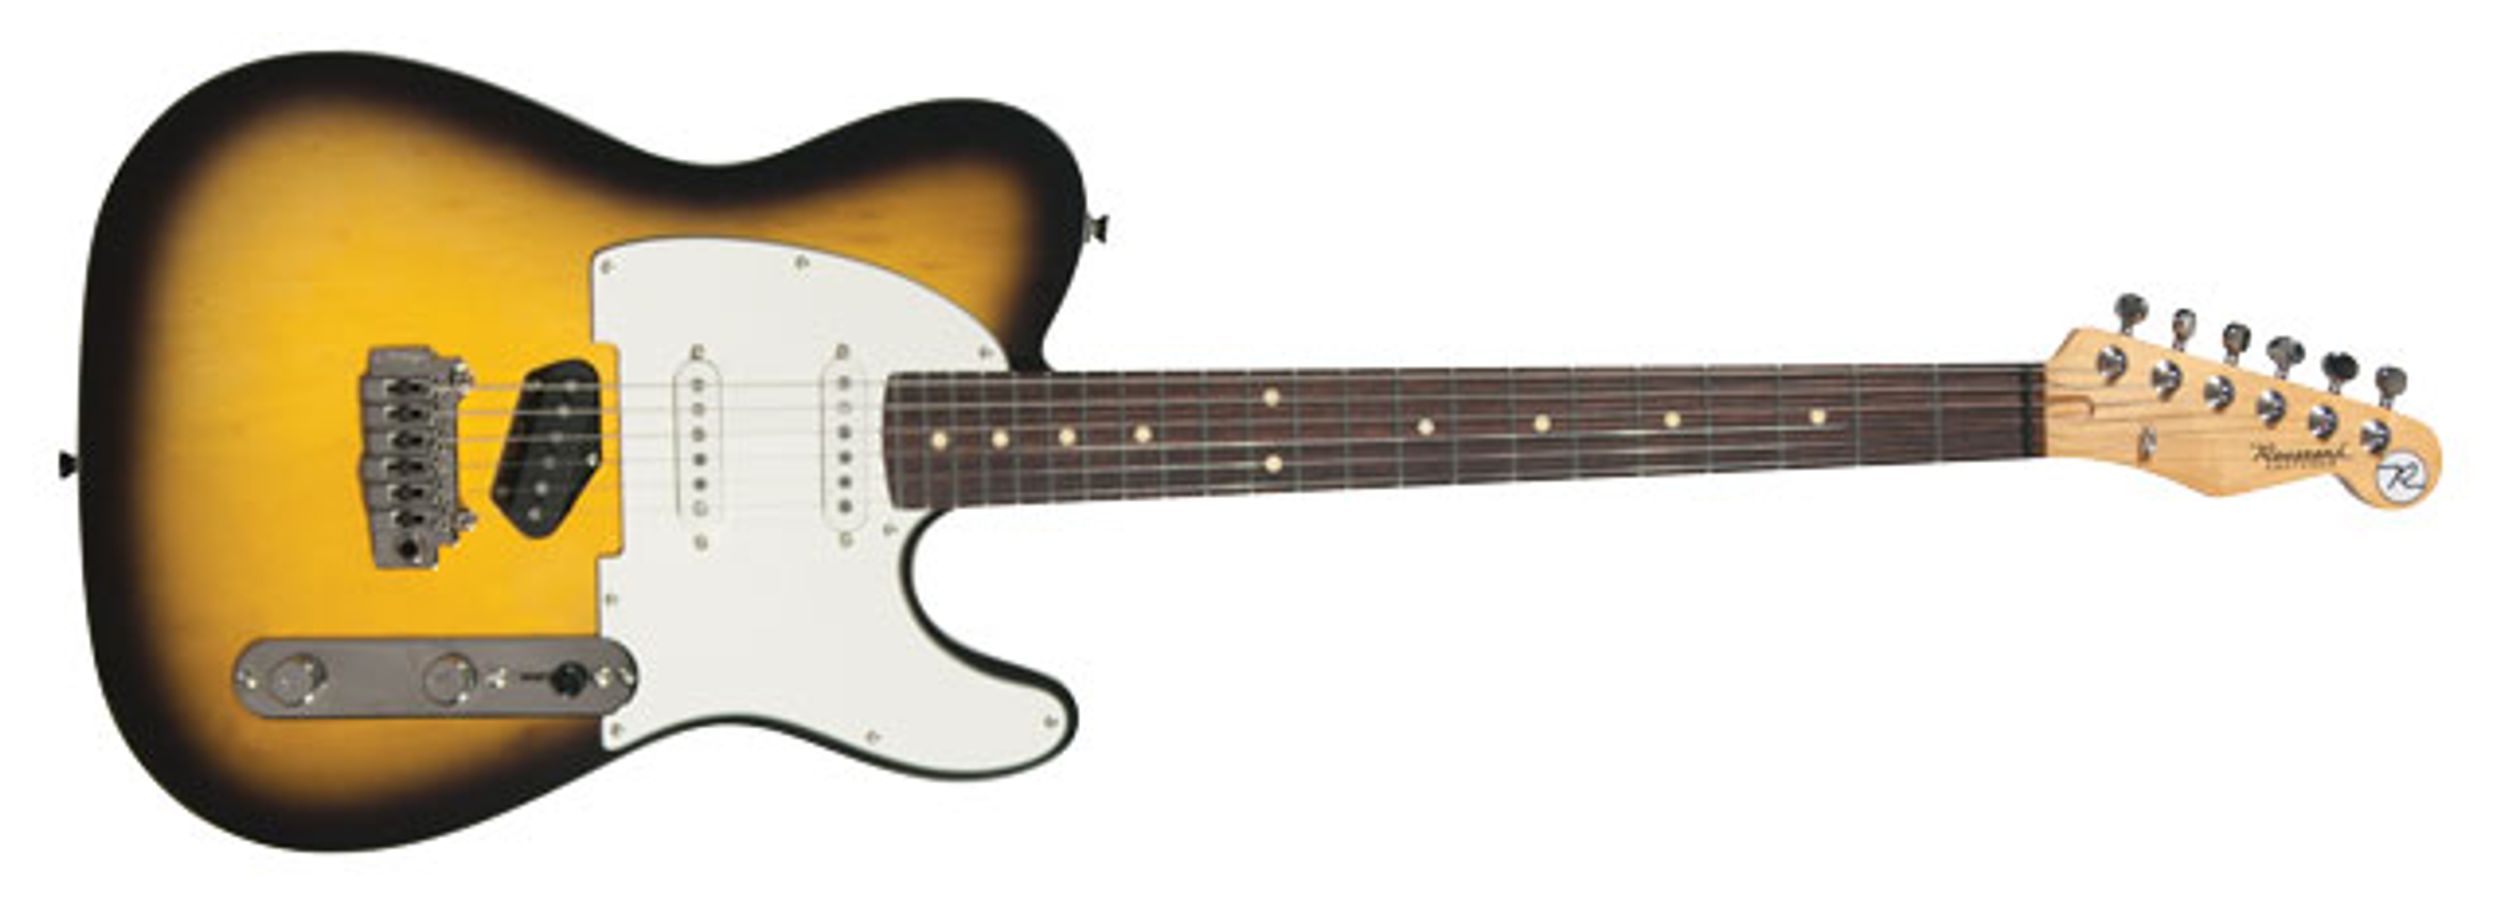 Reverend Pete Anderson Eastsider S Guitar Review